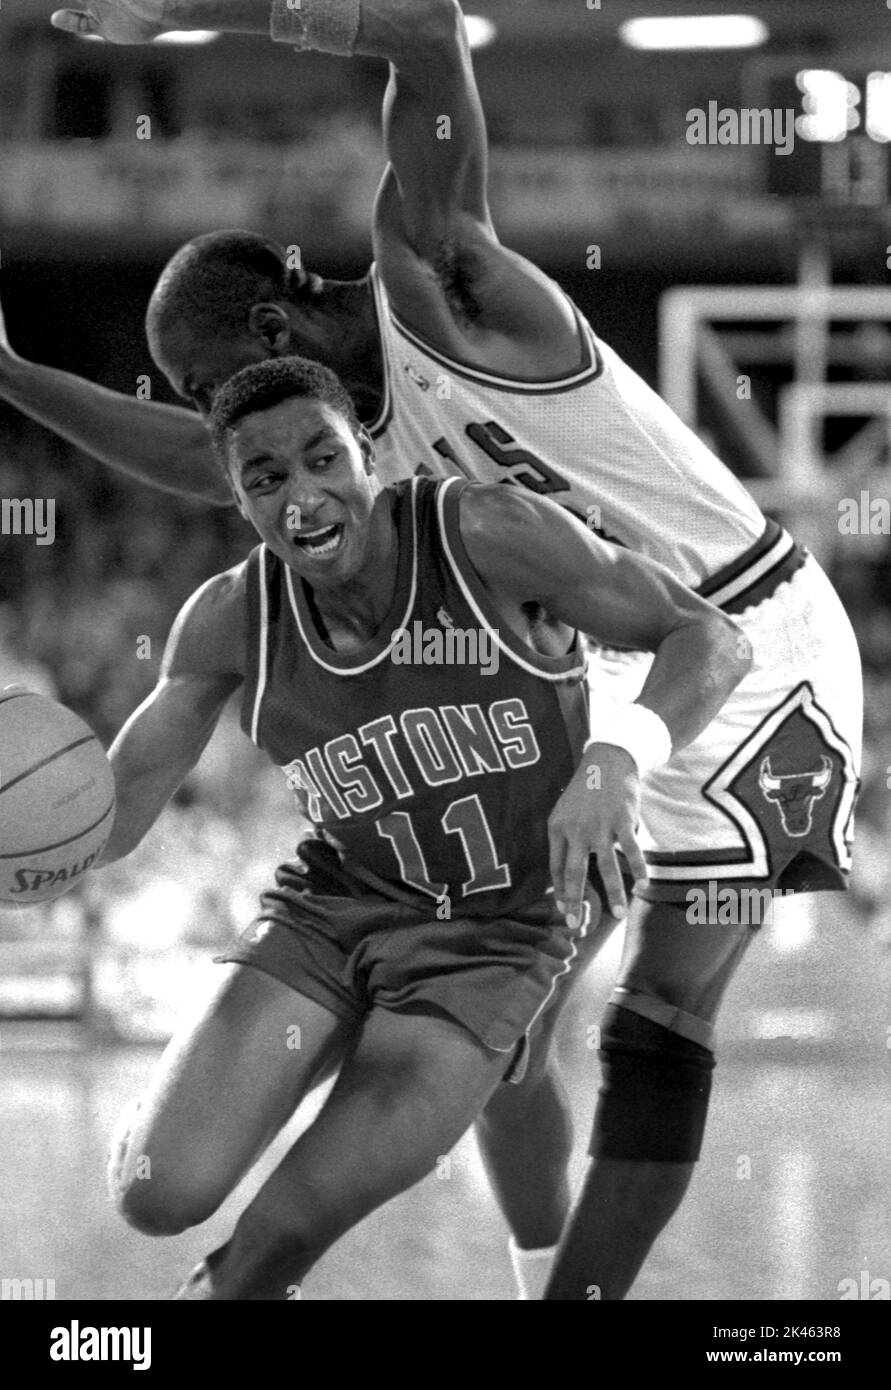 Detroit Piston Isiah Thomas drives past defender Michael Jordan of the Chicago Bulls in game action in the 1980s. Stock Photo